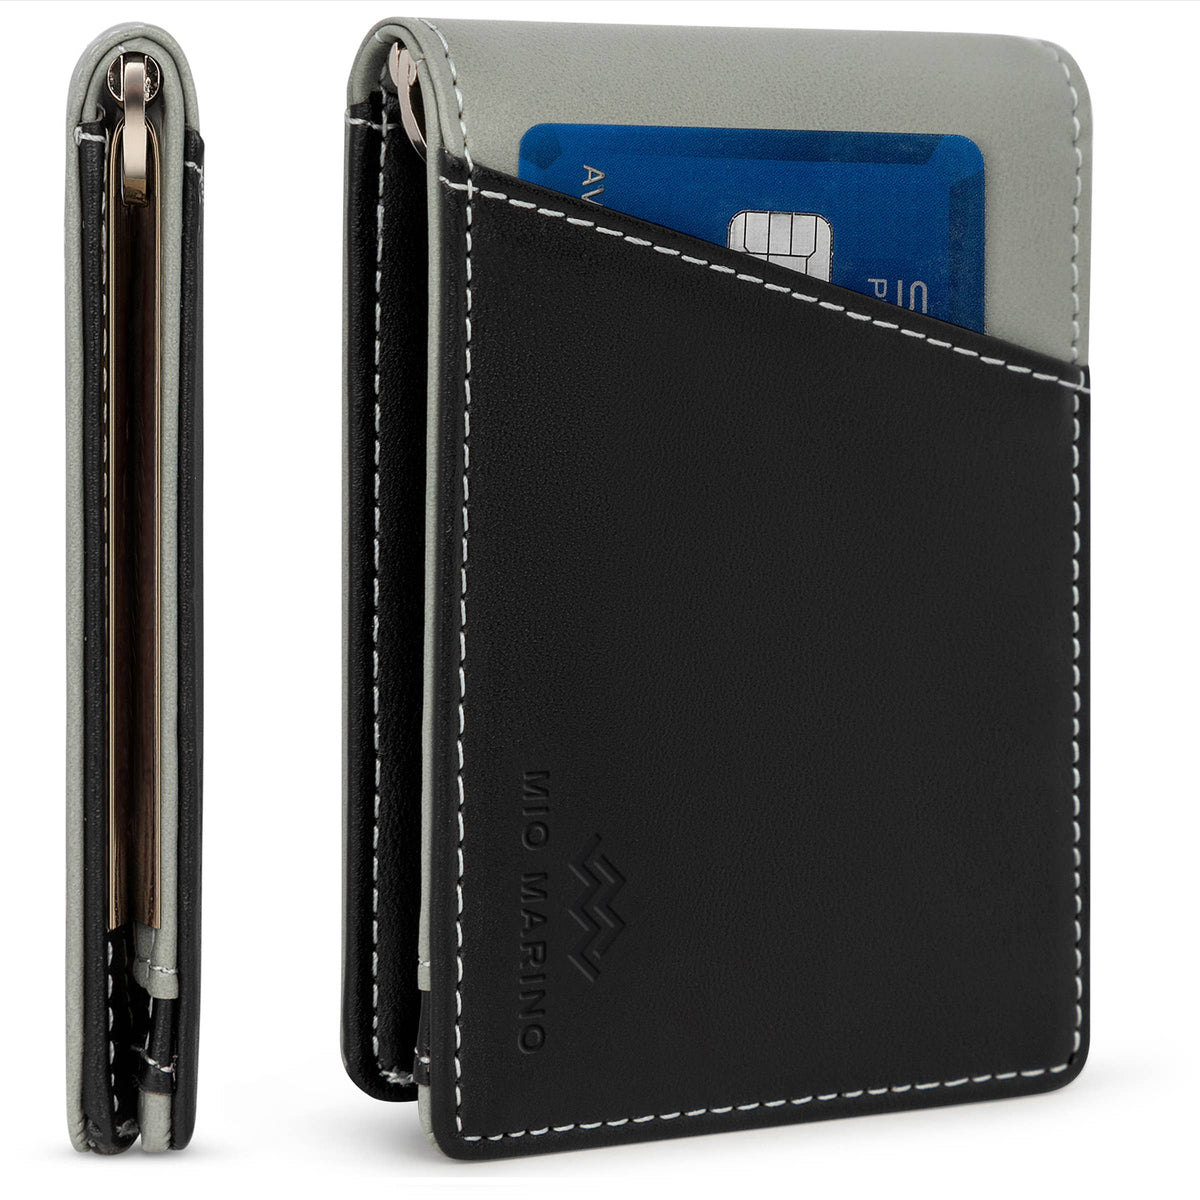 Mio Marino - Men's Slim Bifold Wallet with Quick Access Pull Tab: Black/Gray - WALLET - Synik Clothing - synikclothing.com